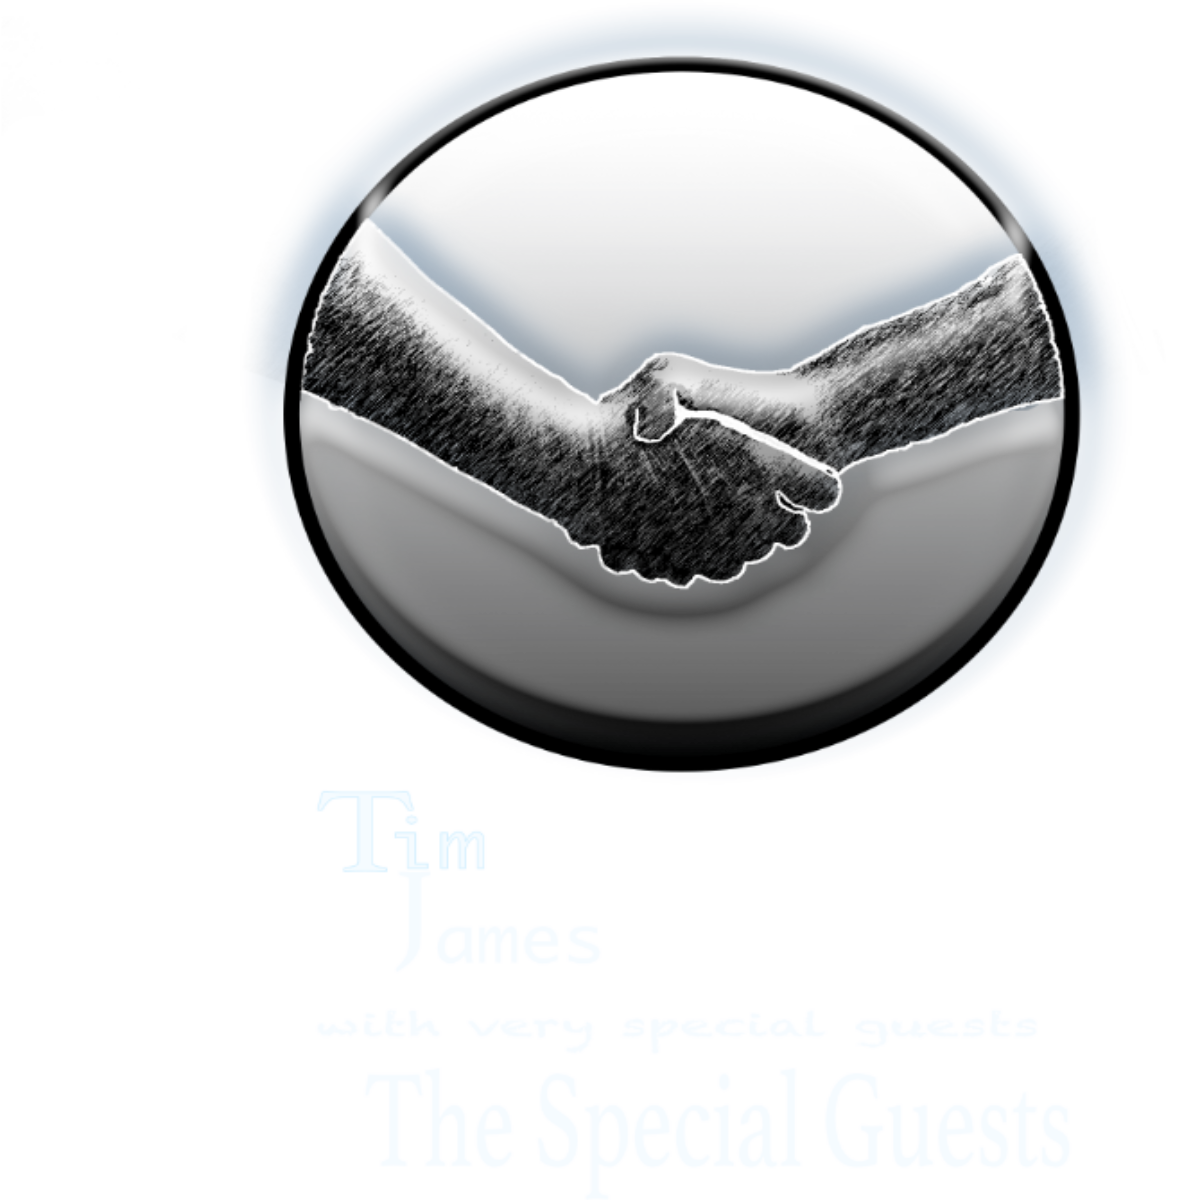 Tim James with very special guests, The Special Guests